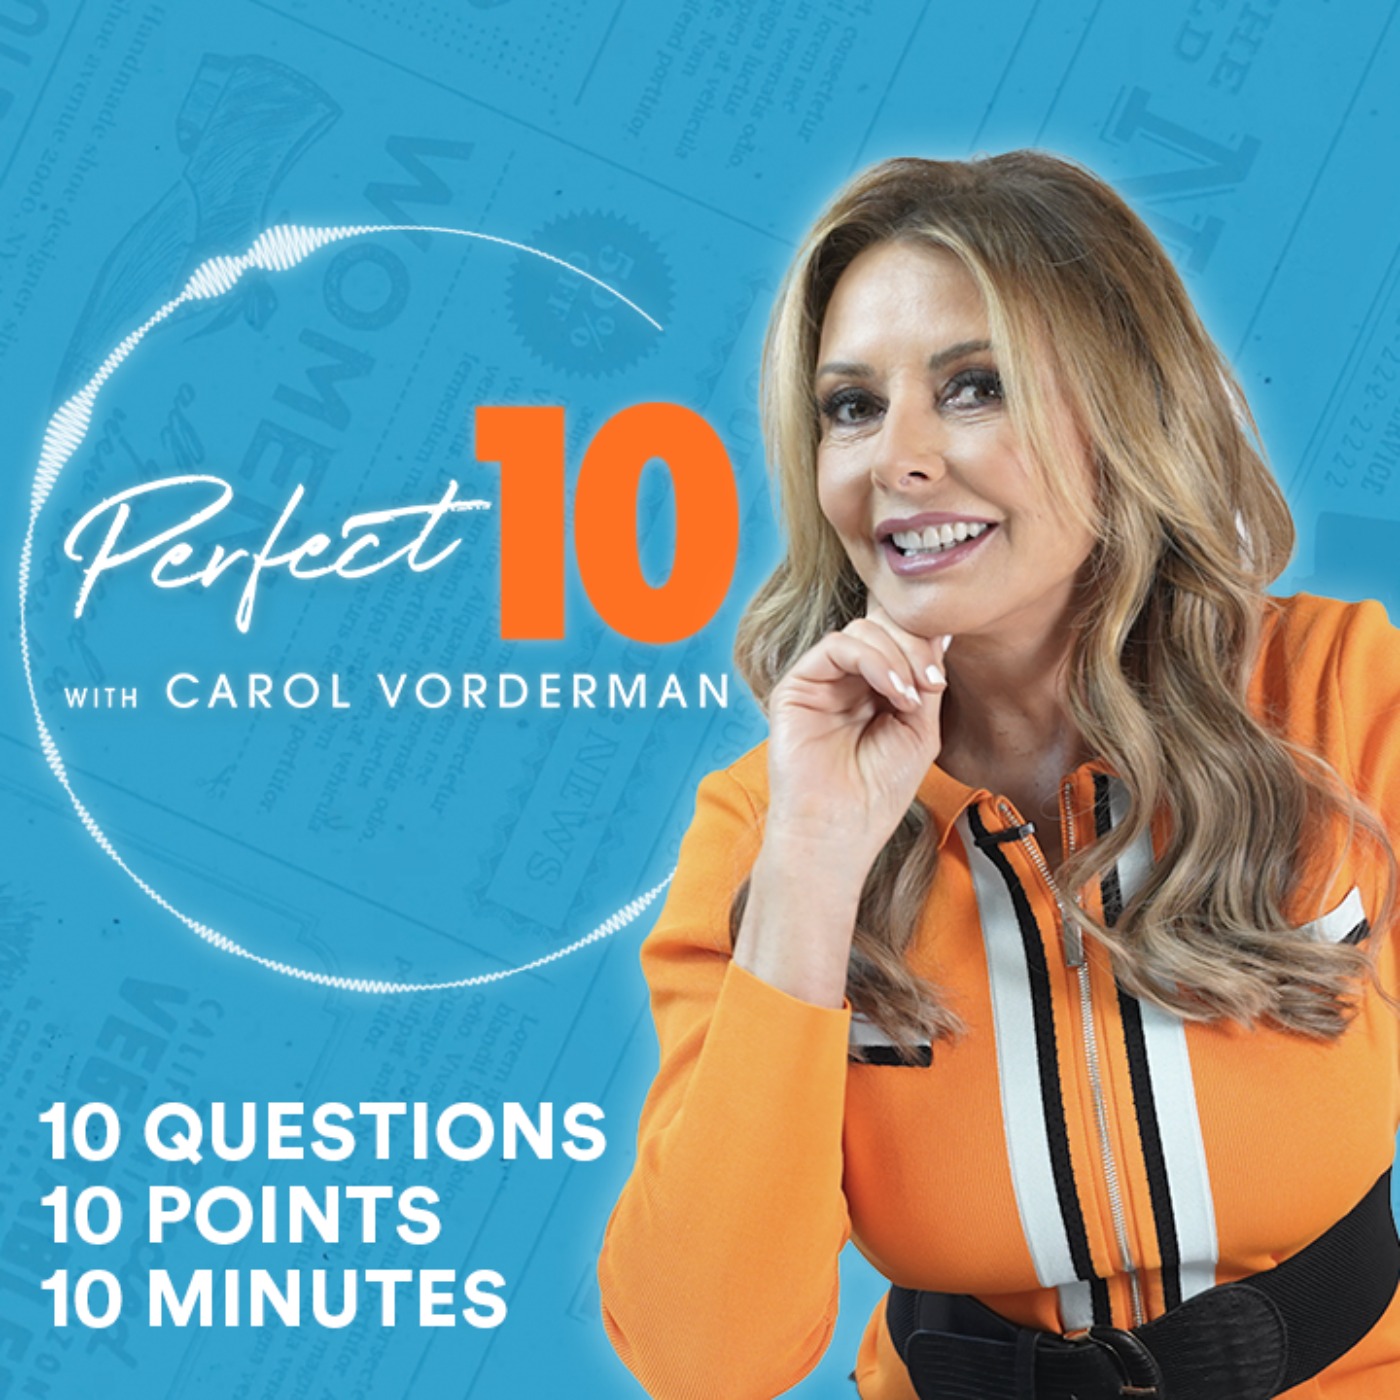 Perfect 10 with Carol Vorderman podcast show image